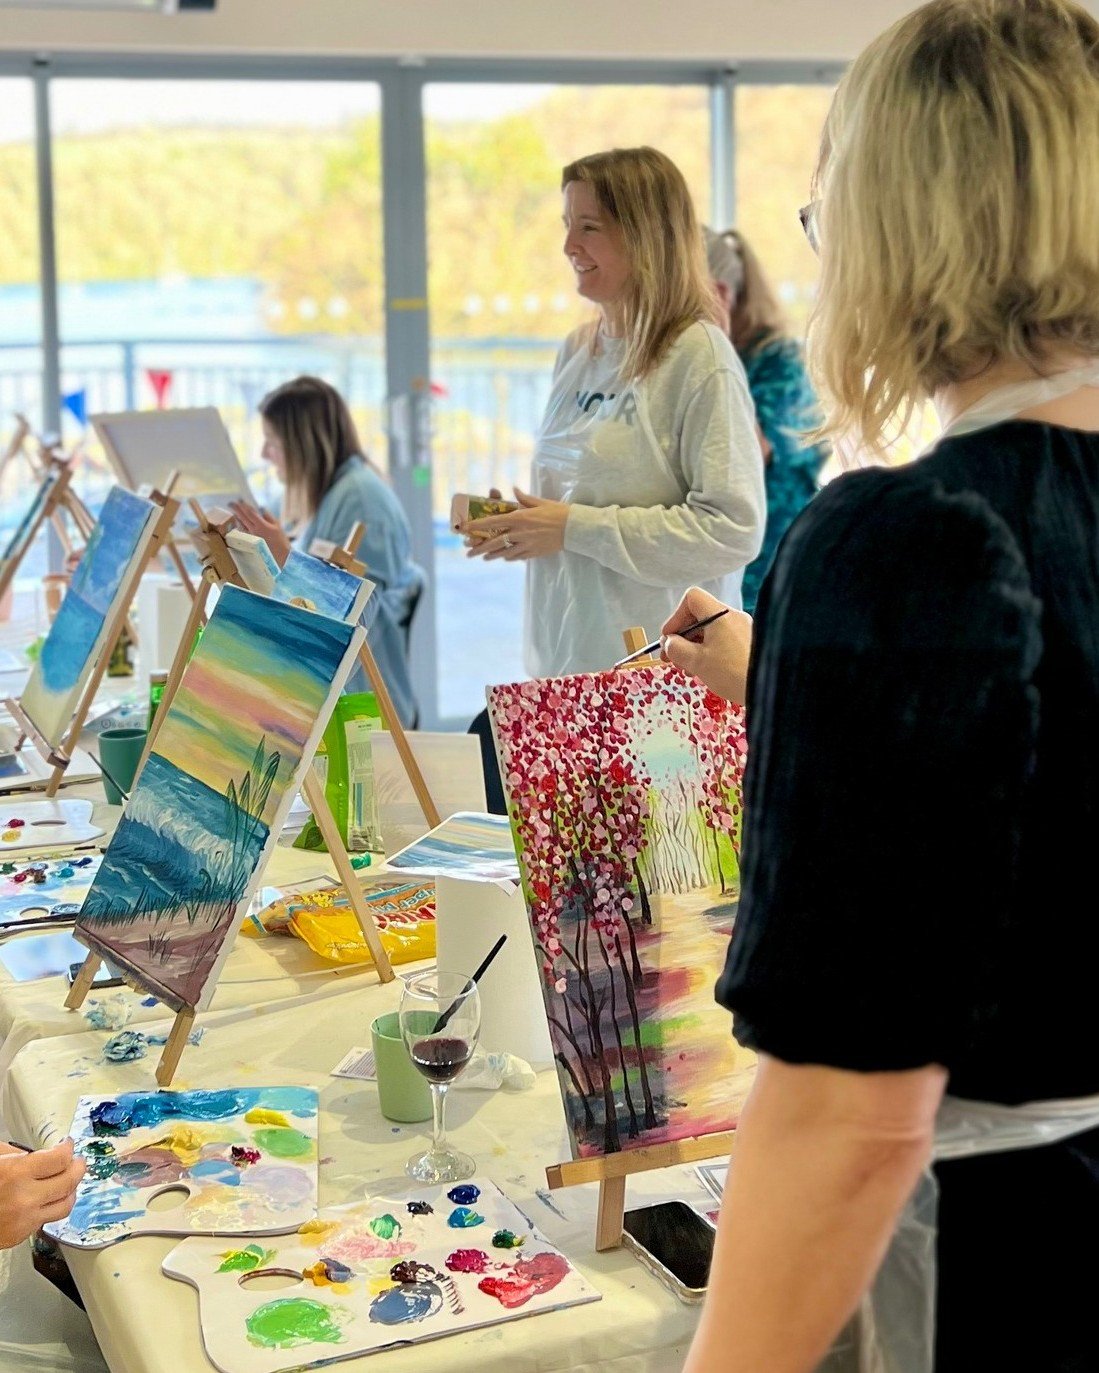 Imagine dedicating your day off to self-care: you're holding a paintbrush in one hand and your preferred beverage in the other, surrounded by friendly faces. That's the Art &amp; Wine Cornwall experience. 🙌🏻

#paint #hobby #truro #CornwallEvents #c